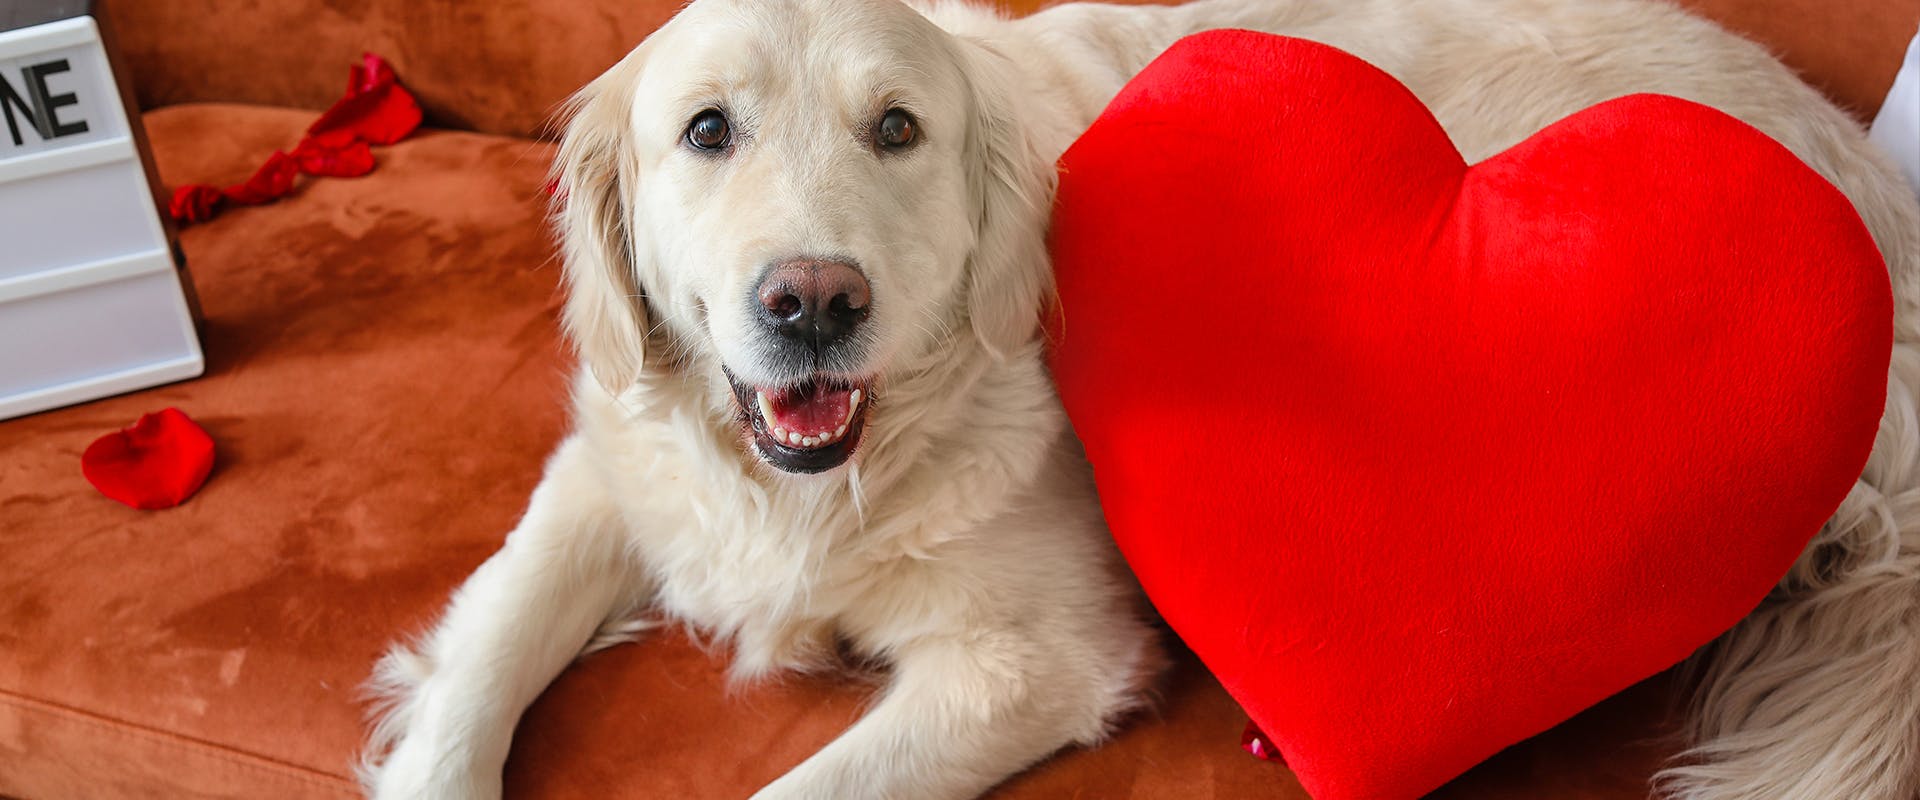 A happy looking Golden Retriever sitting on a sofa next to a large red heart-shaped cushion